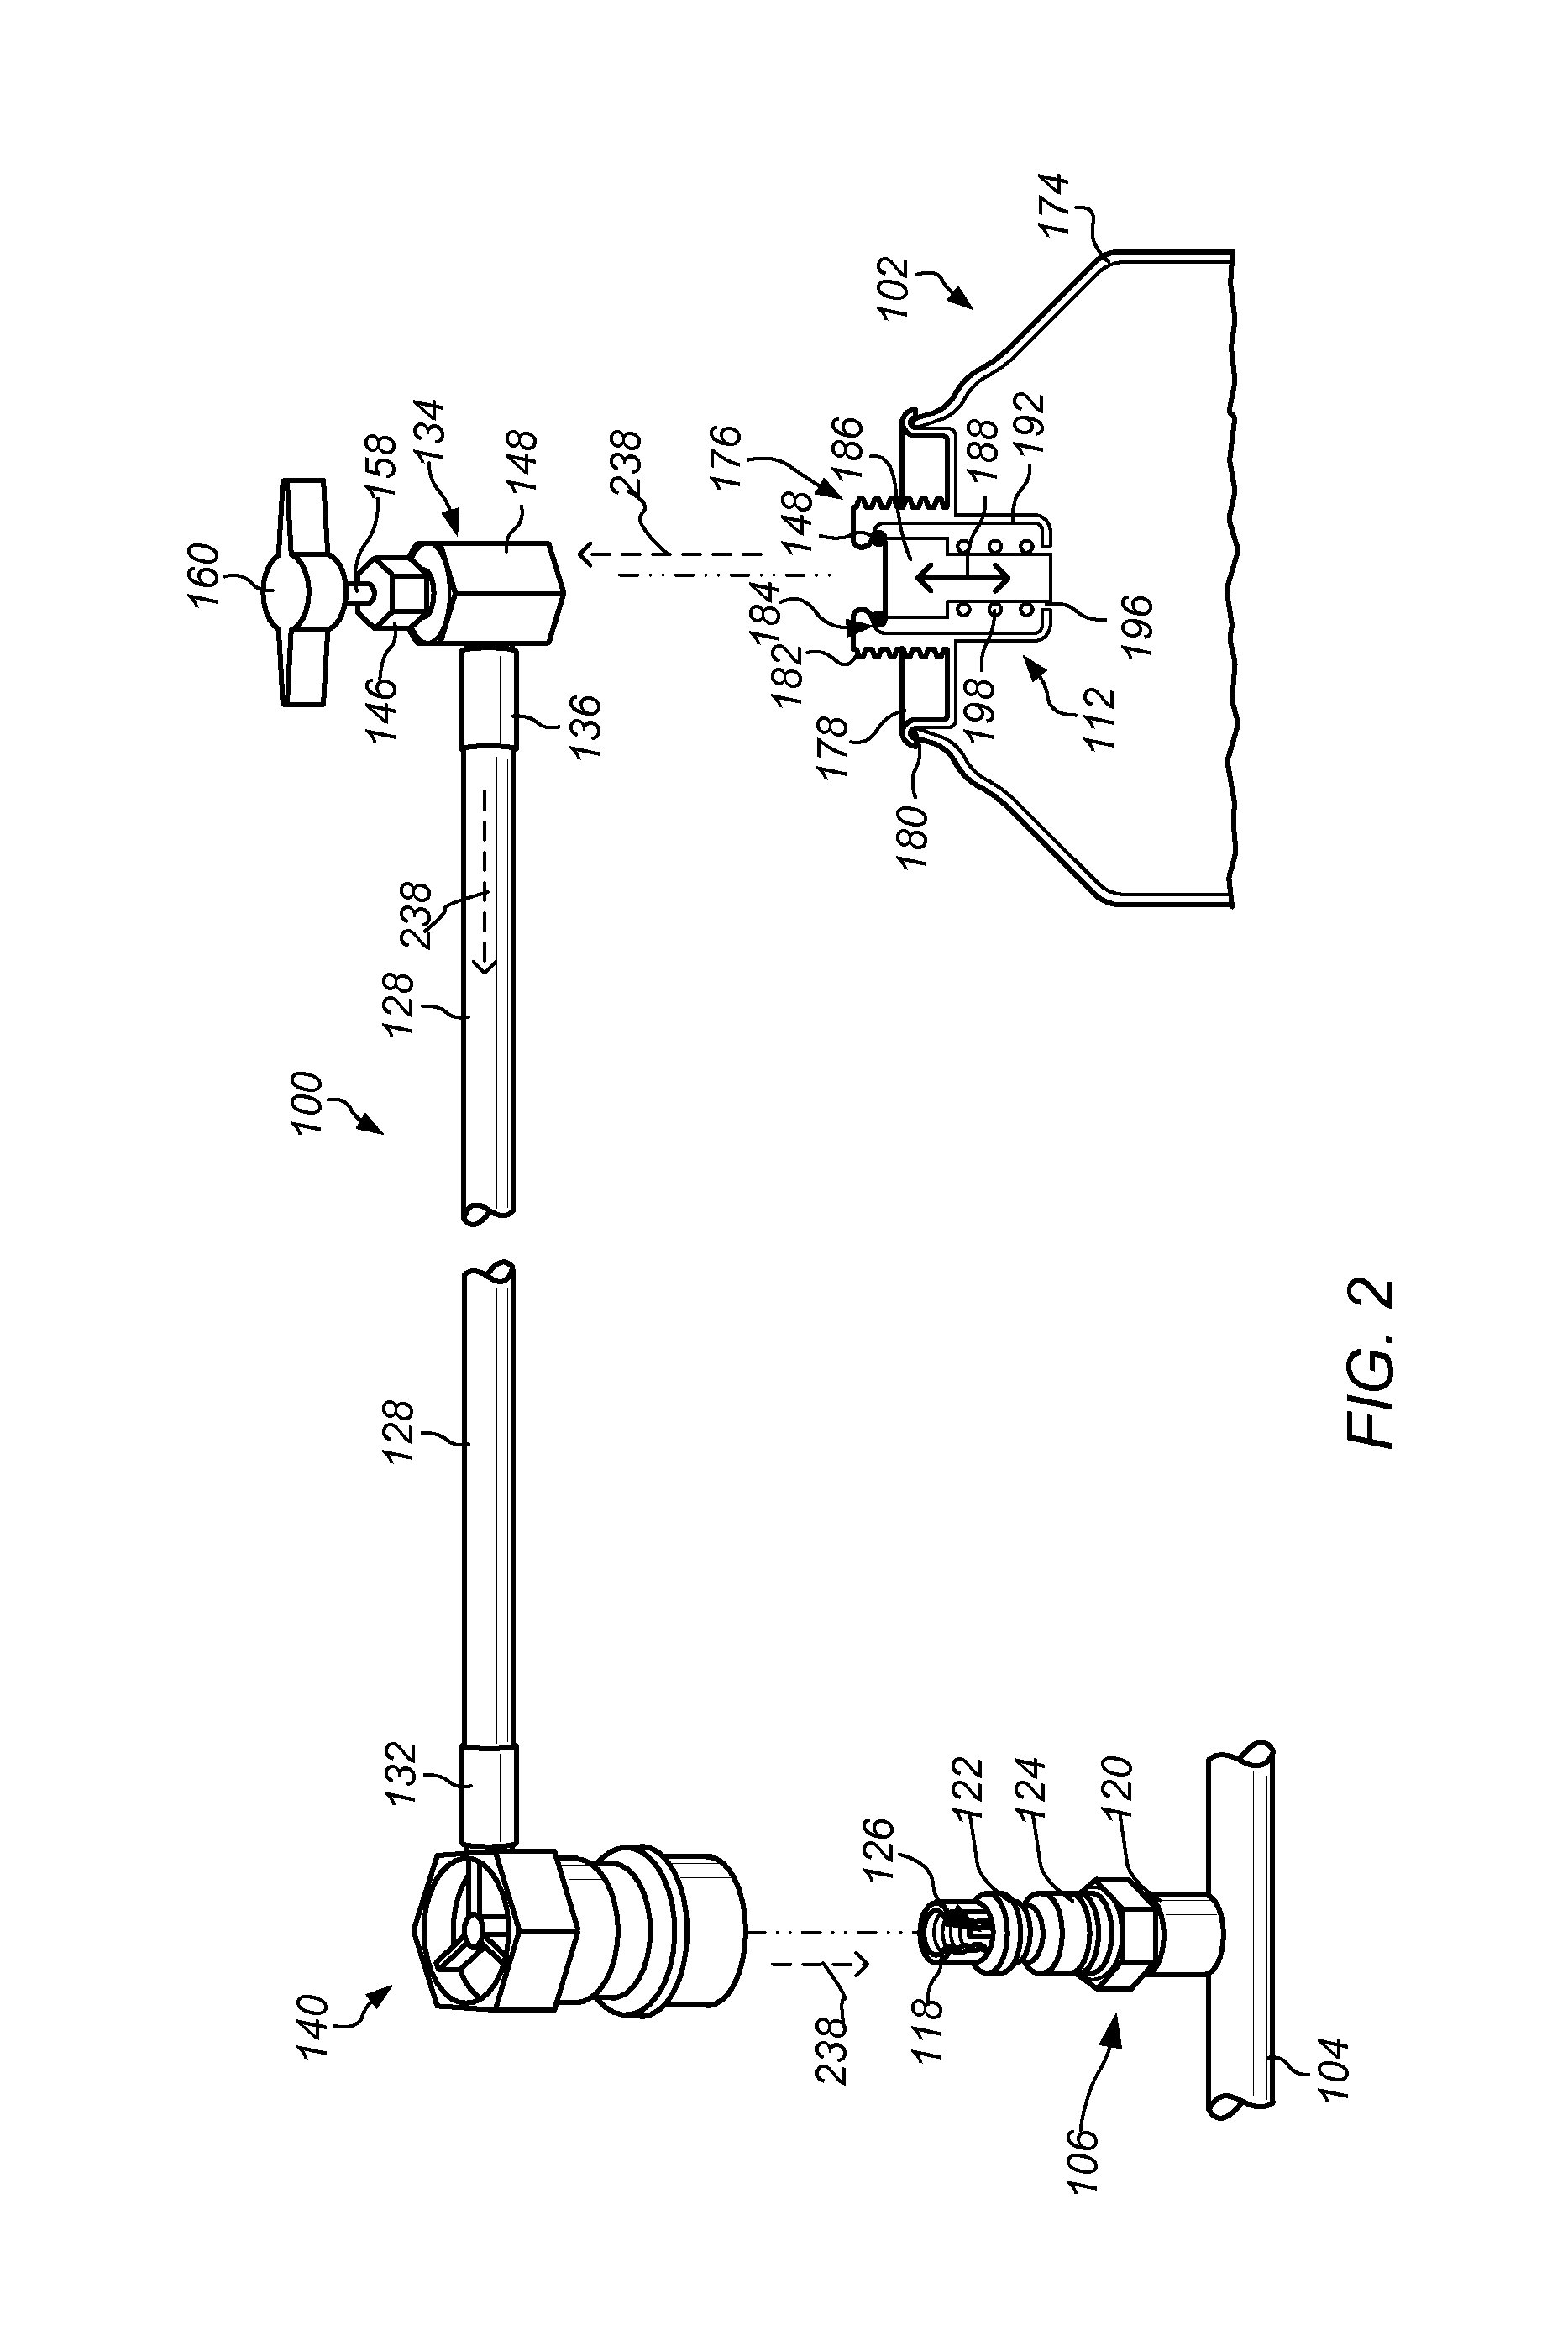 Refrigerant charging assemblies and methods of use